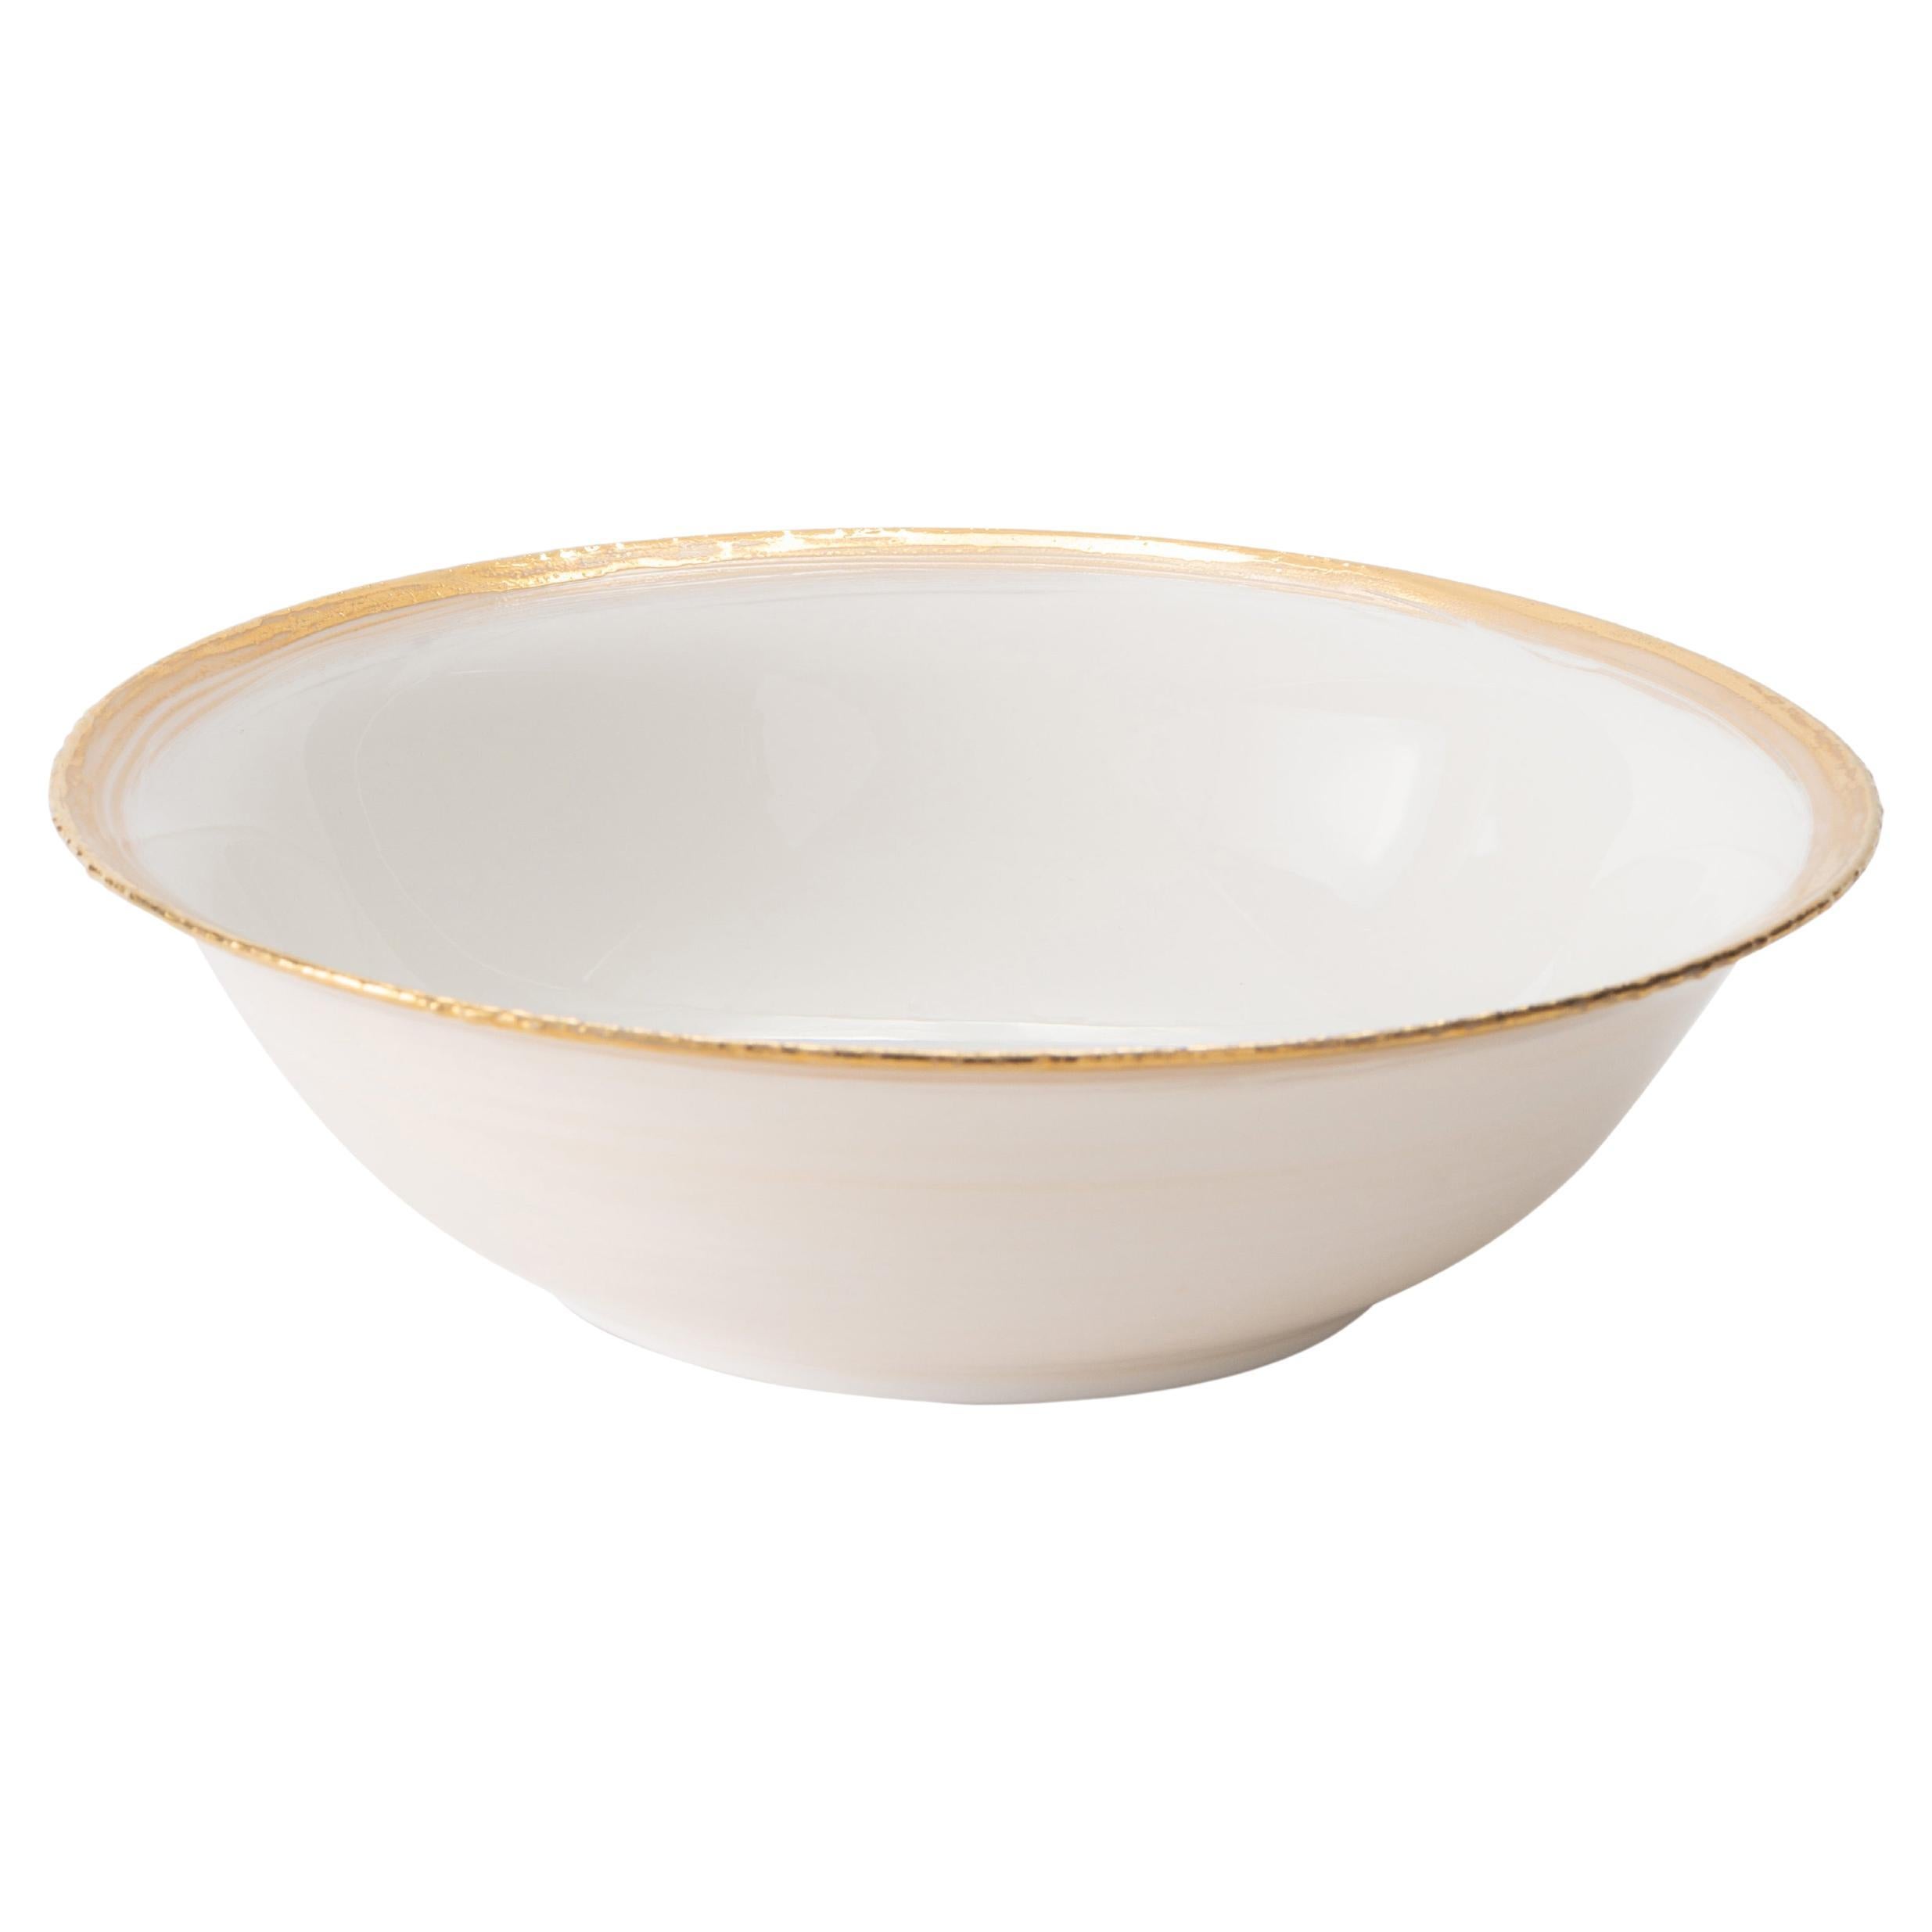 Porcelain Salad Bowl White Enamel Golden Edge Hand Painted Made in Italy For Sale